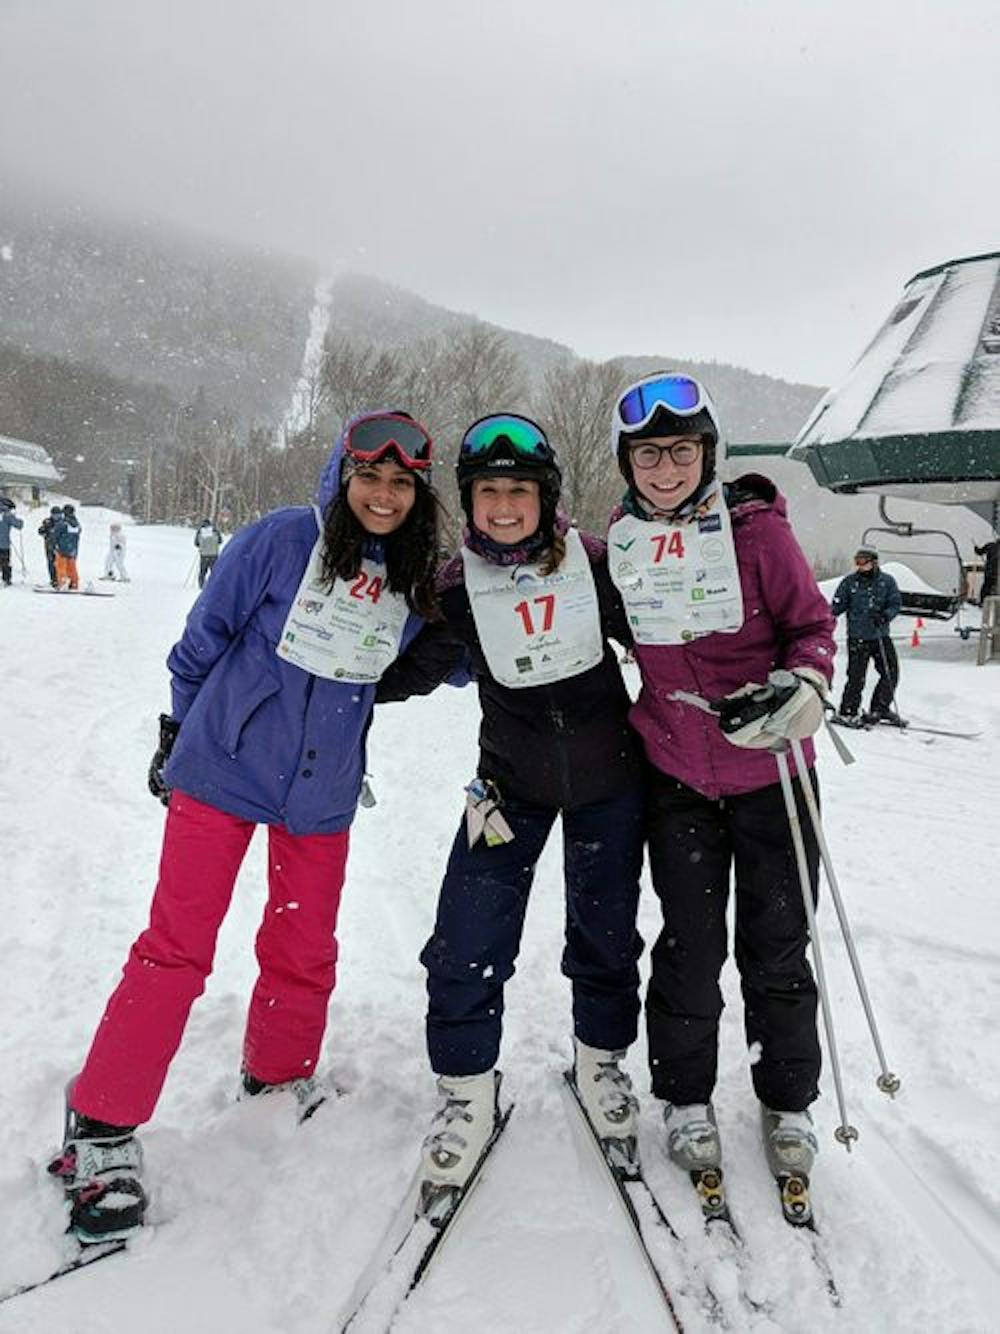 <span class="photocreditinline">COURTESY PHOTO</span><br />Members of the SheFly team hit the slopes. From left: Bianca Gonzalez ’18, Georgia Grace Edwards ’18 and Charlotte Massey ’19.